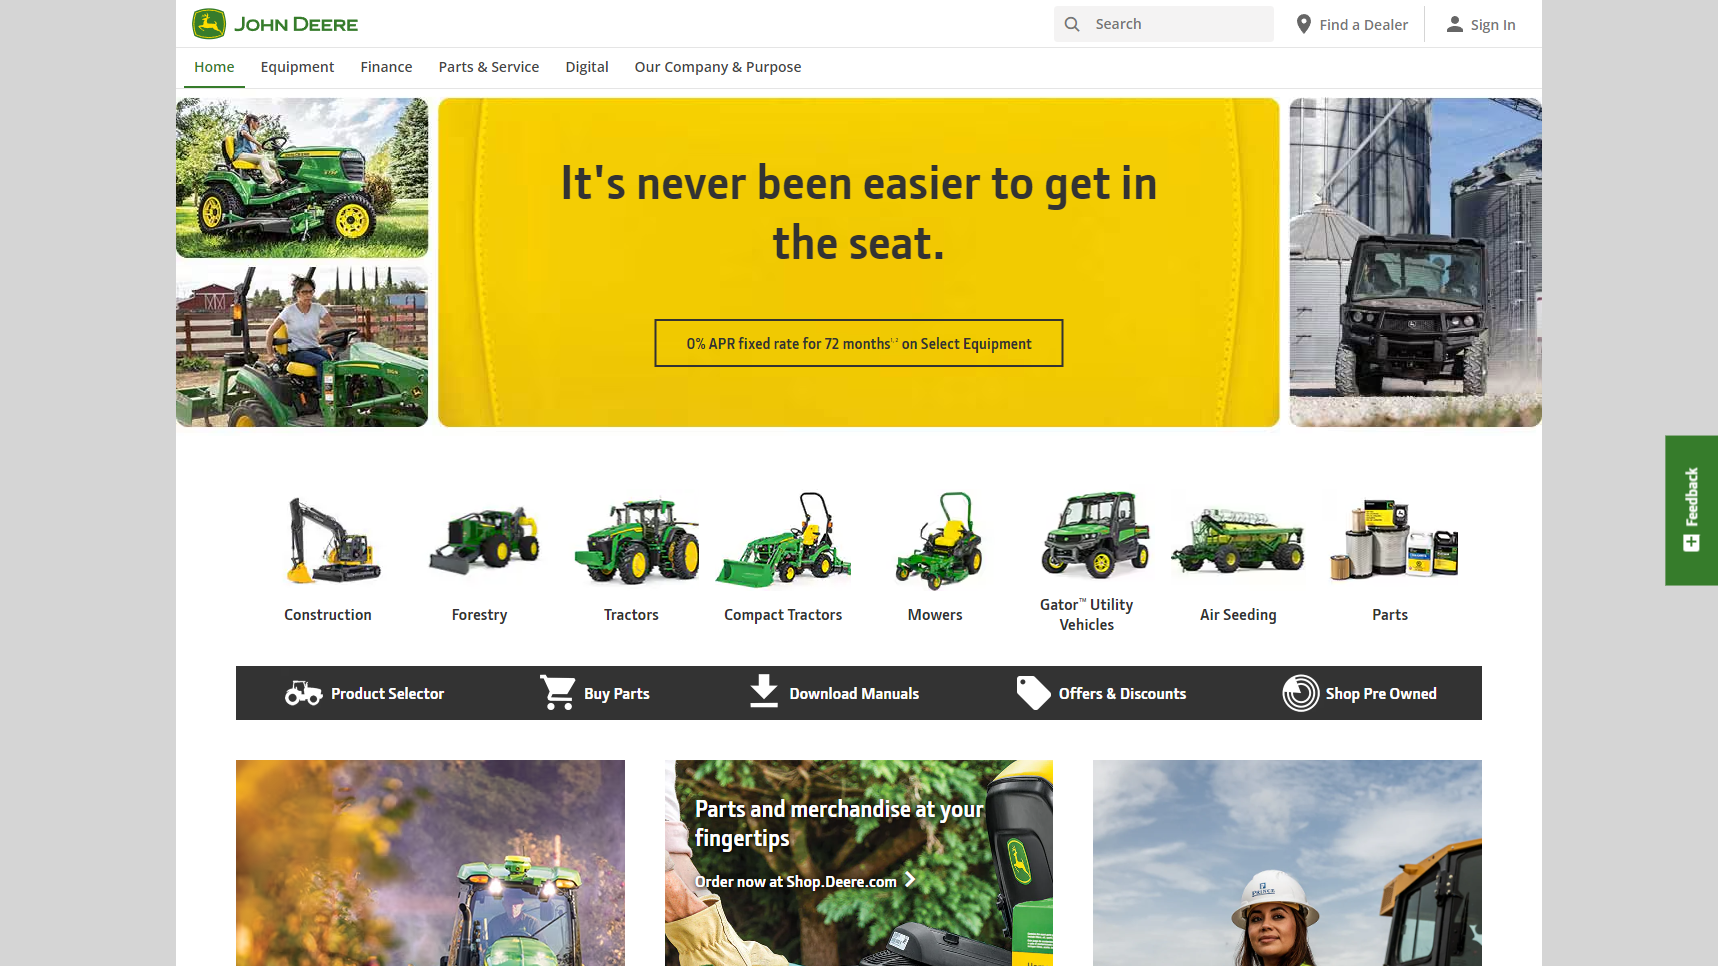 Deere & Company - Machinery Manufacturer